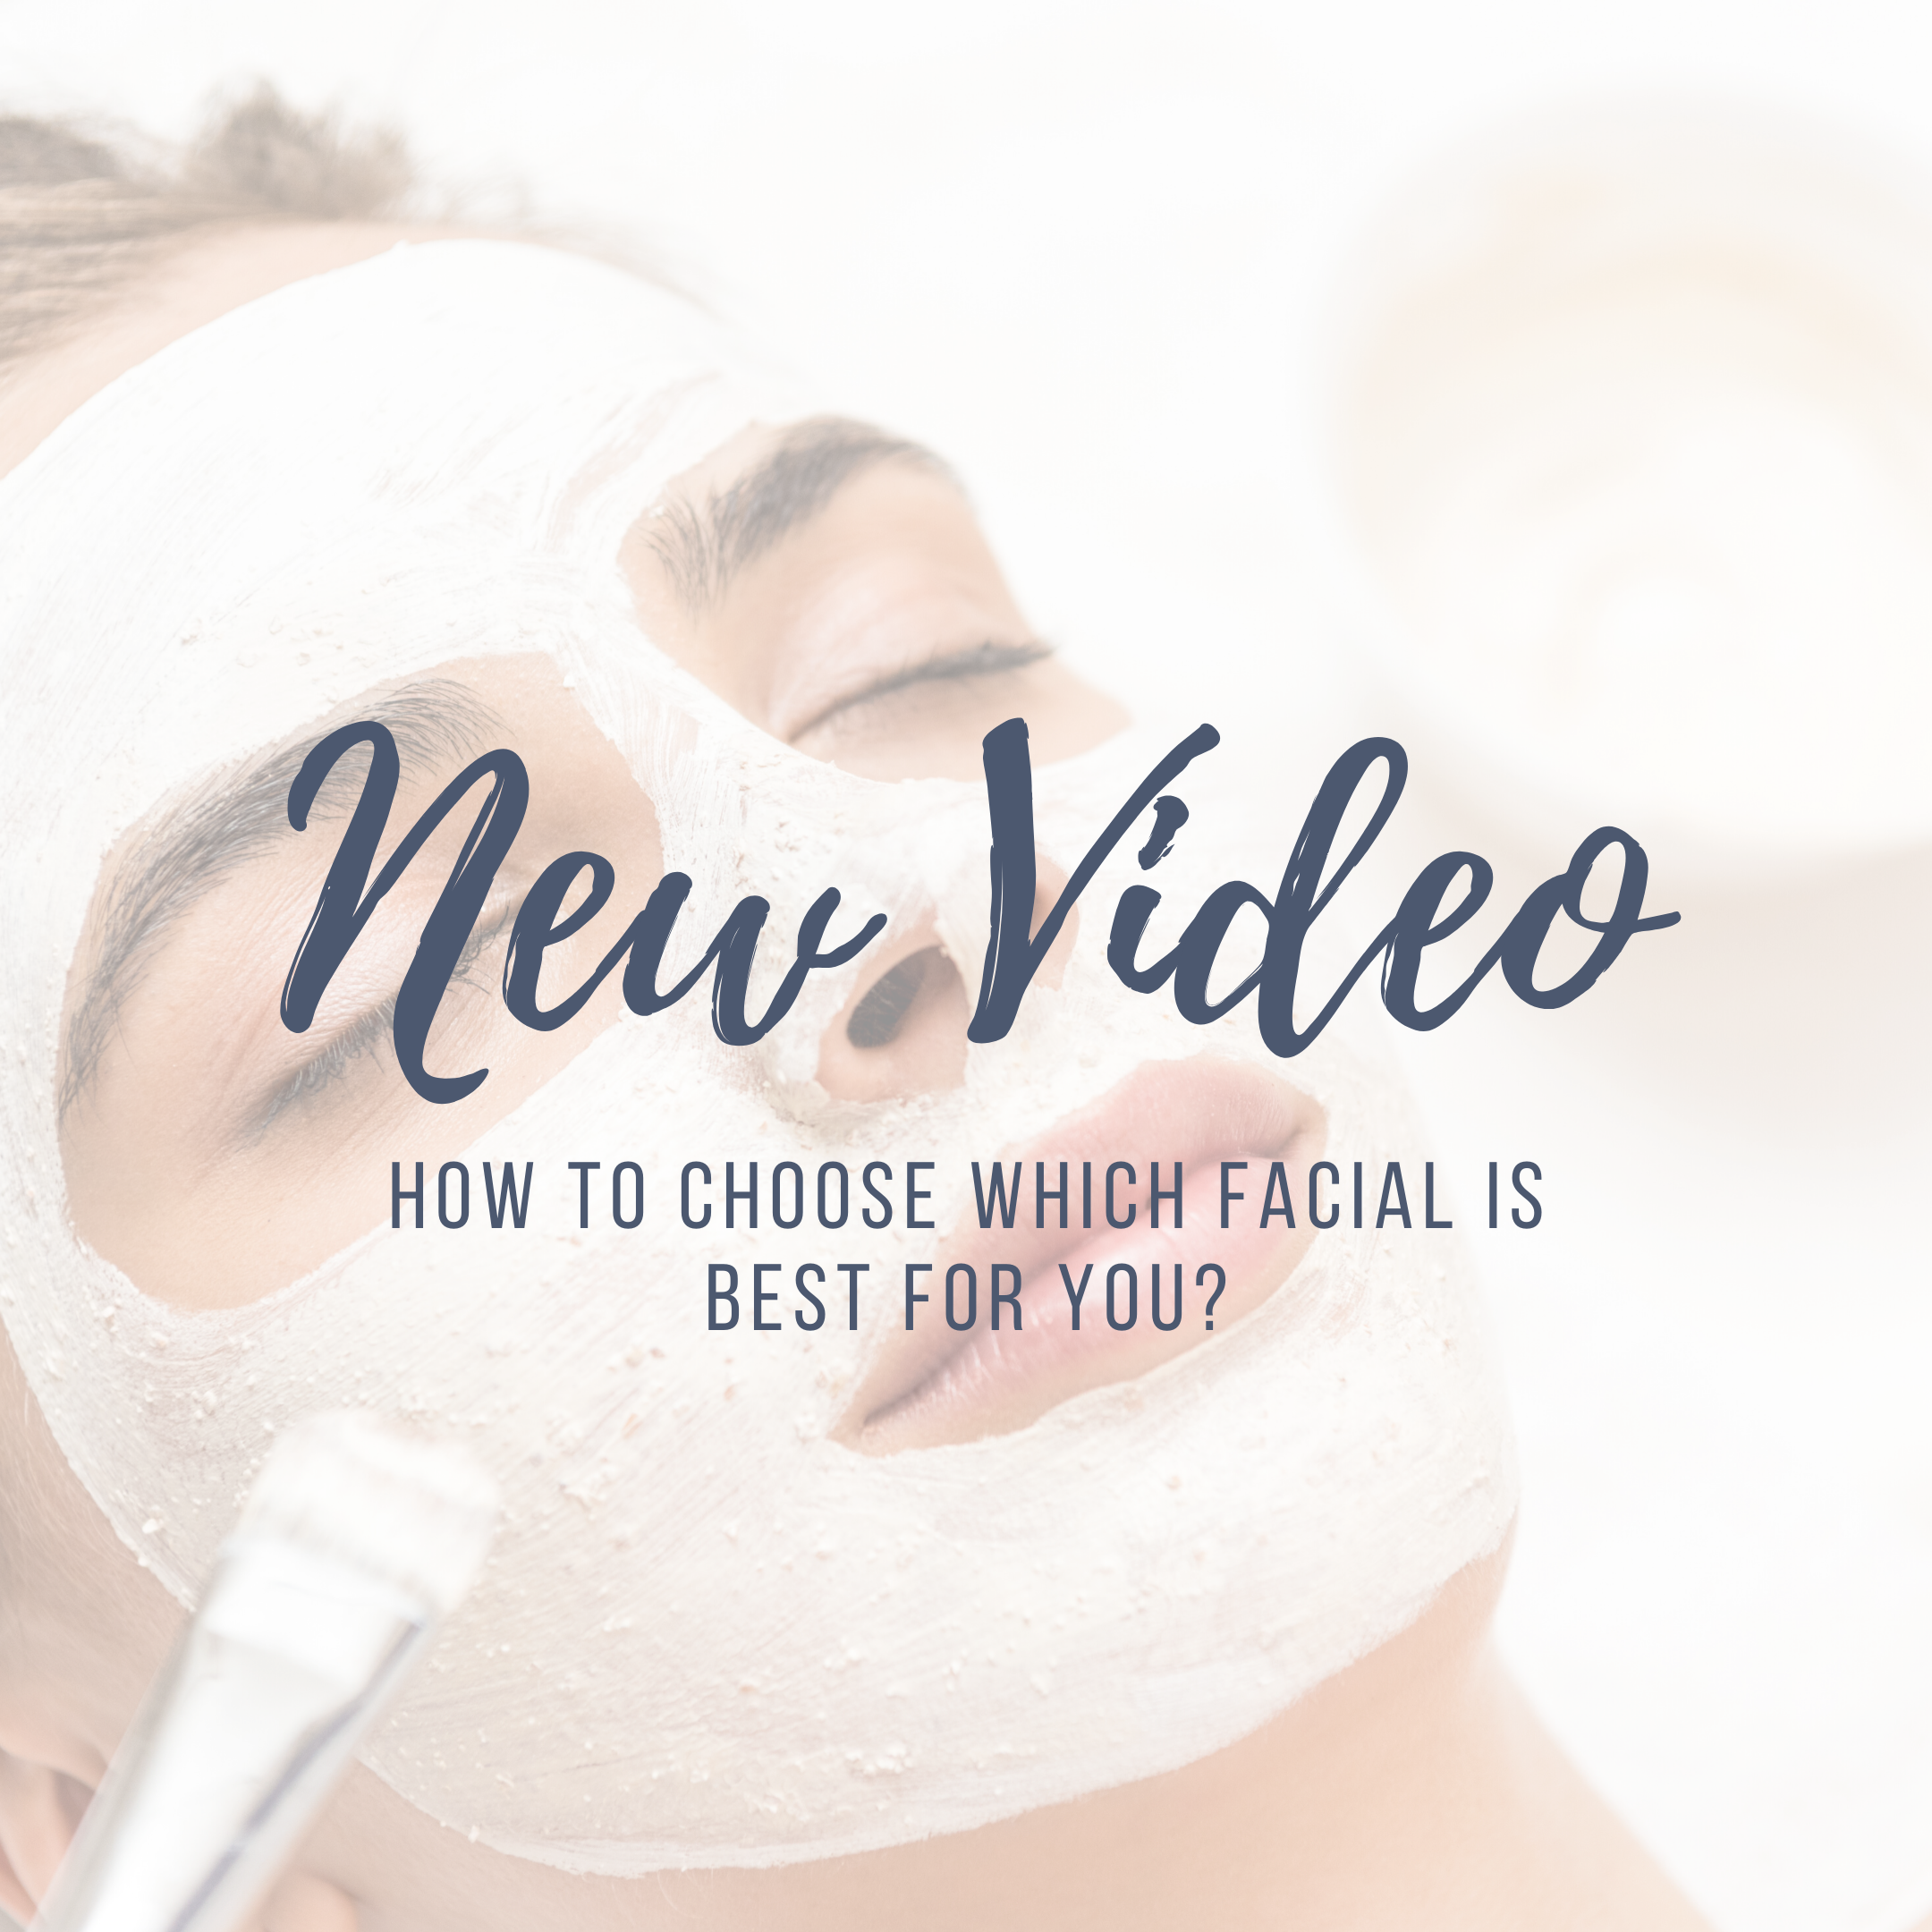 New Video: How to choose which facial is best for you?